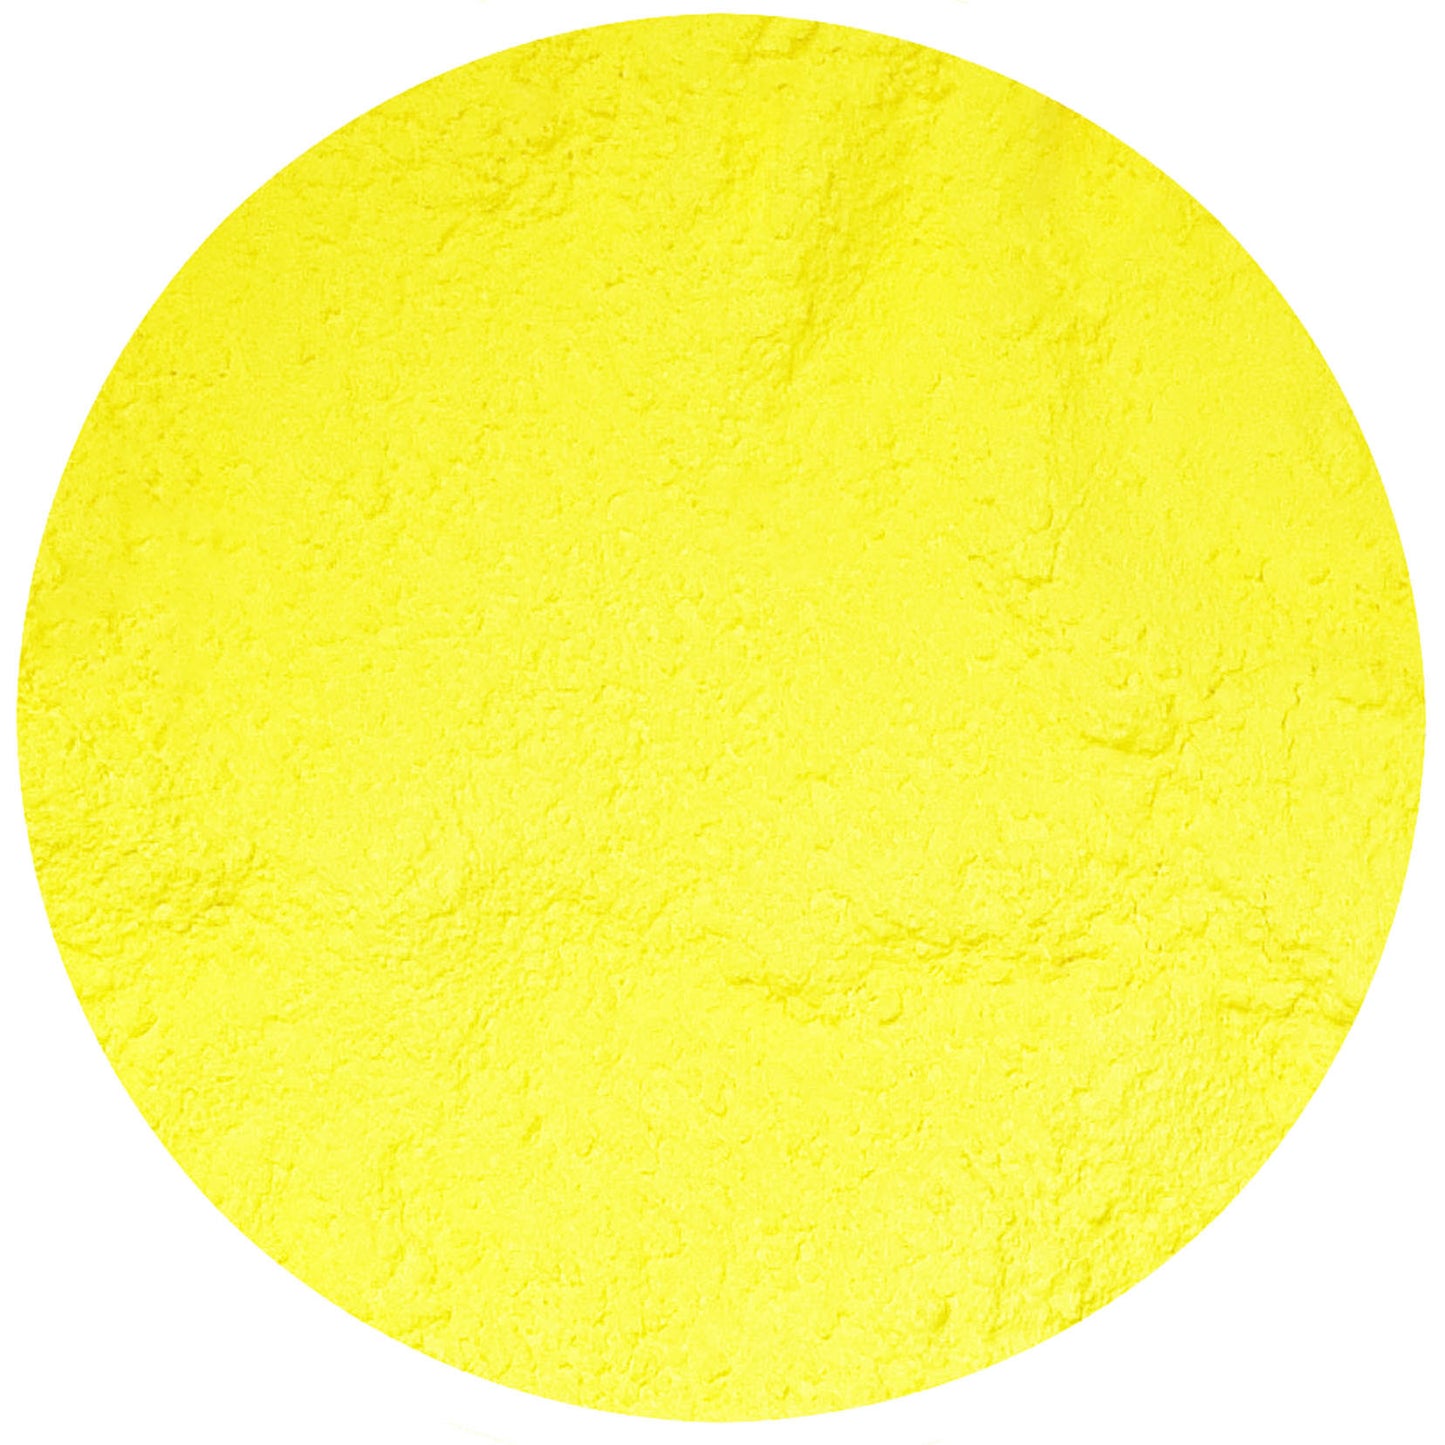 Neon Yellow | Fluorescent Pigment Dye | Candles, Wax Melt, Cosmetics, Bath Bombs, Shower Gel | Truly Personal